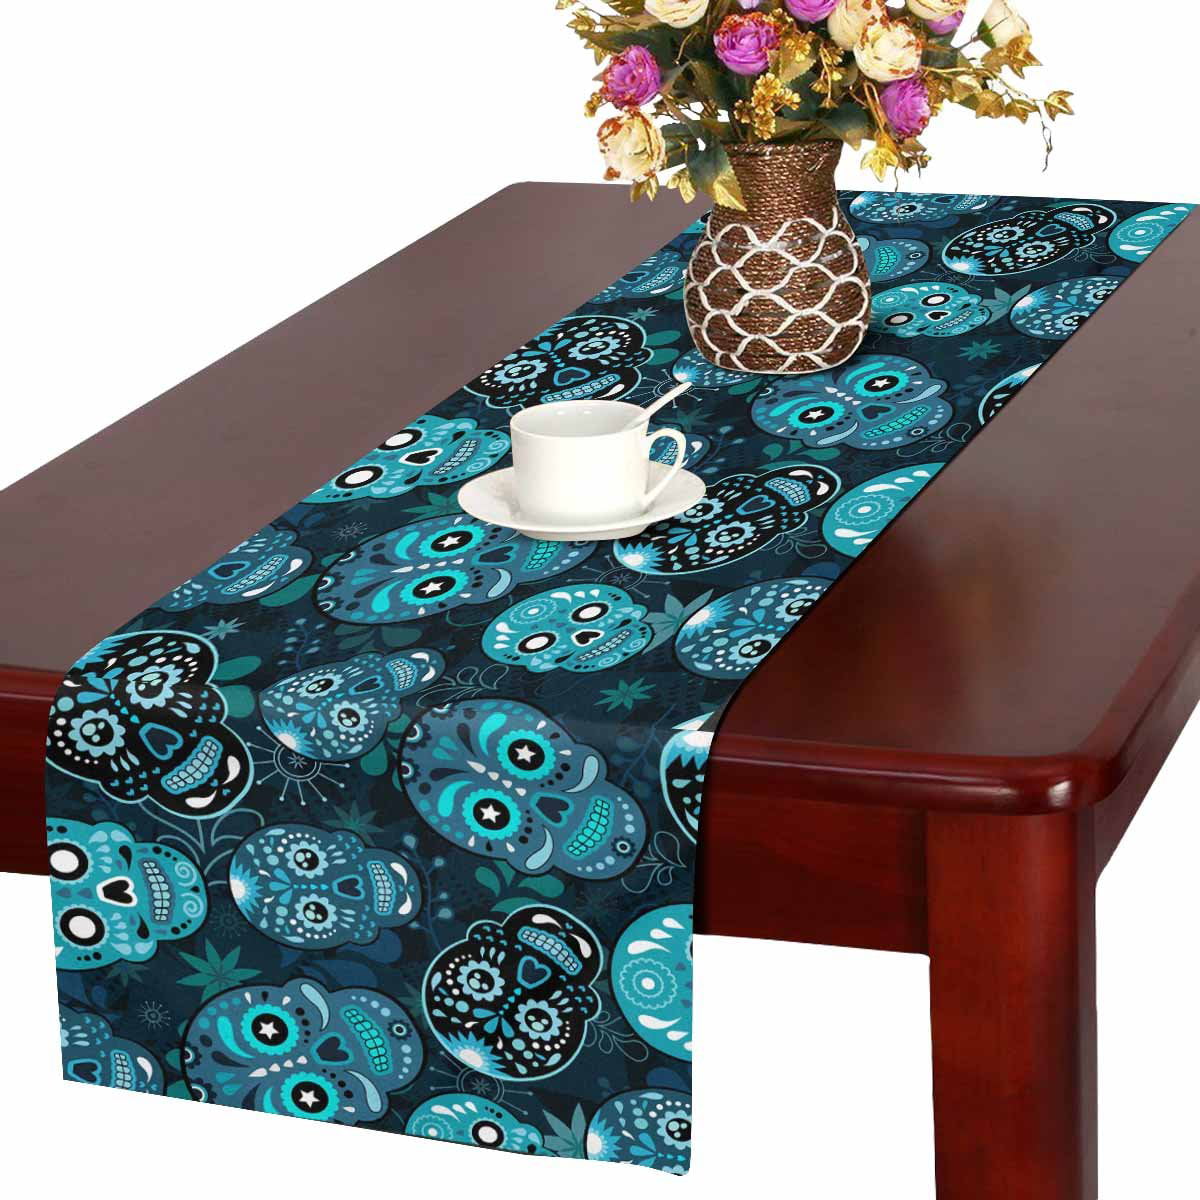 AUUXVA Mexican Flower Leaves Sugar Skull Table Runner Heat Resistant for Home Holiday Party Dining Room Tabletop Decoration 70 inches Long